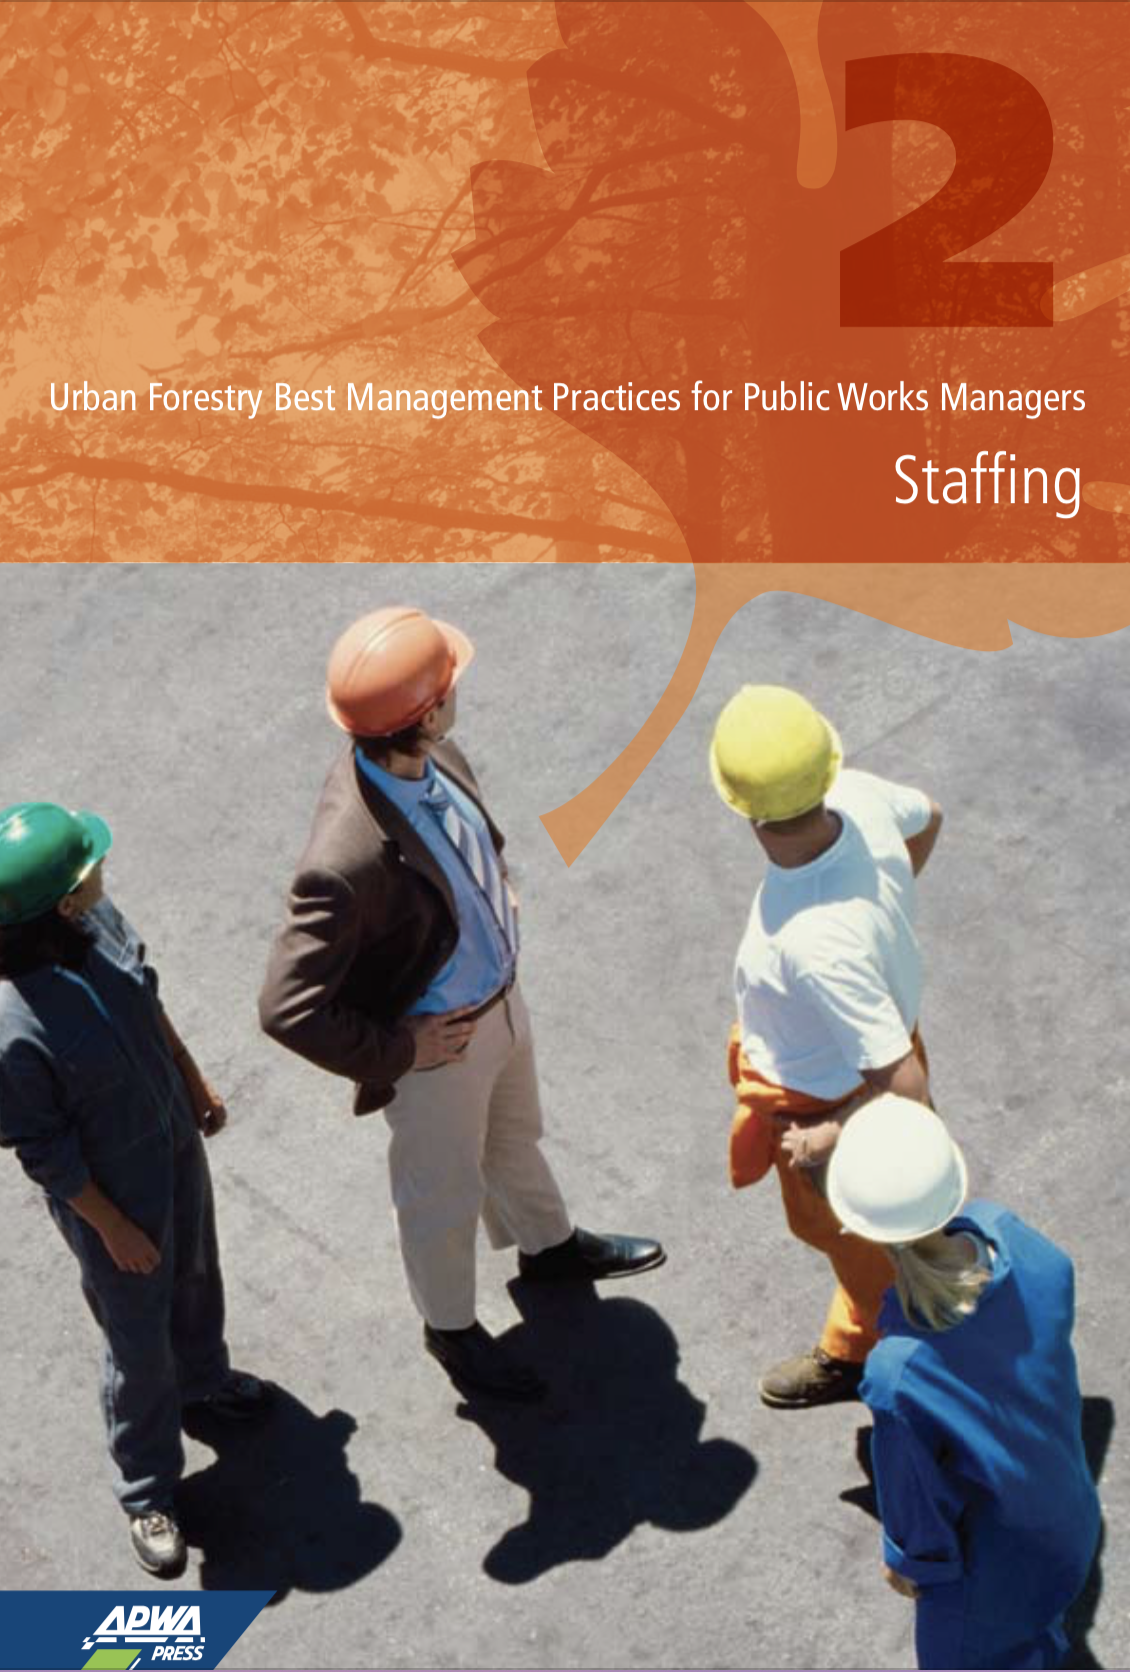 Urban Forestry Best Management Practices for Public Works Managers: Staffing [PUB]